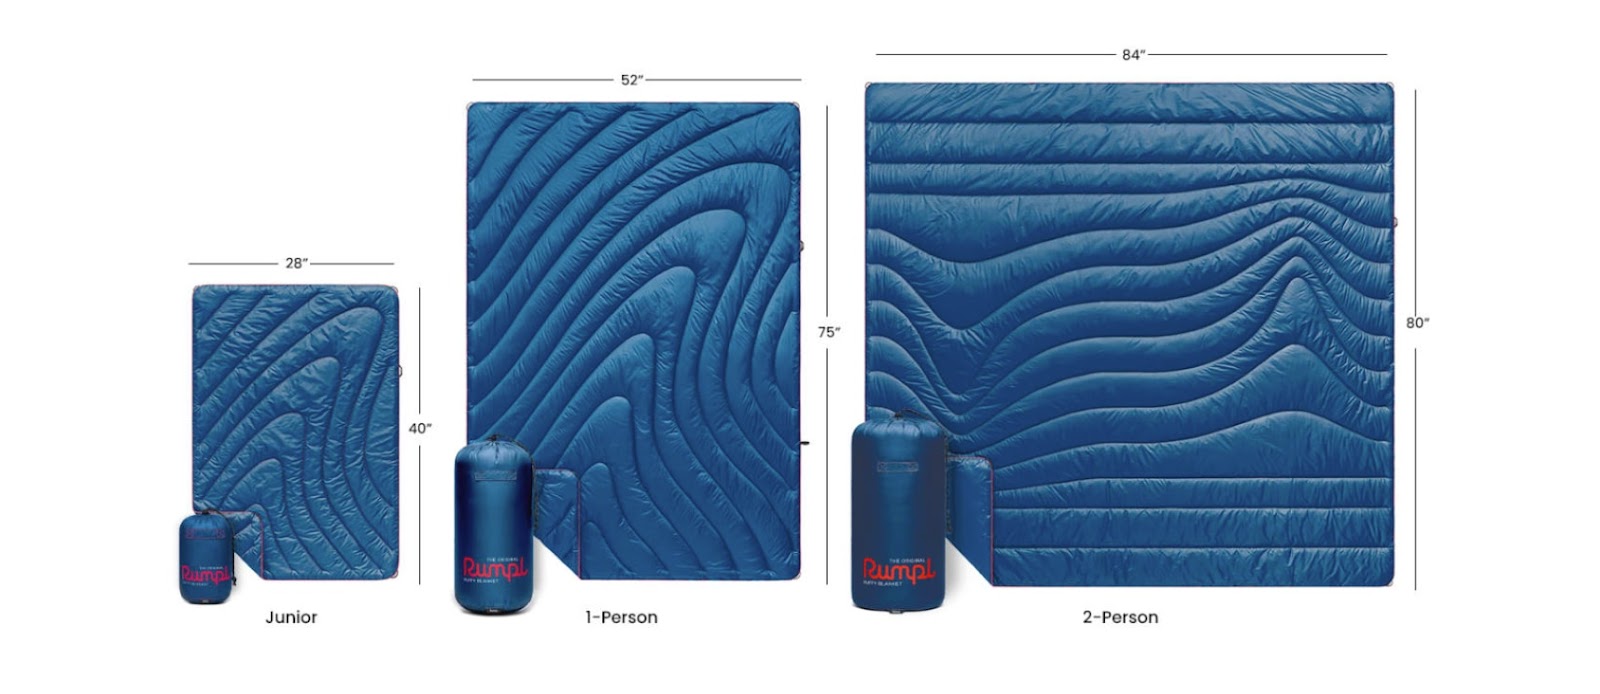 rumpl blanket sizing images side by side